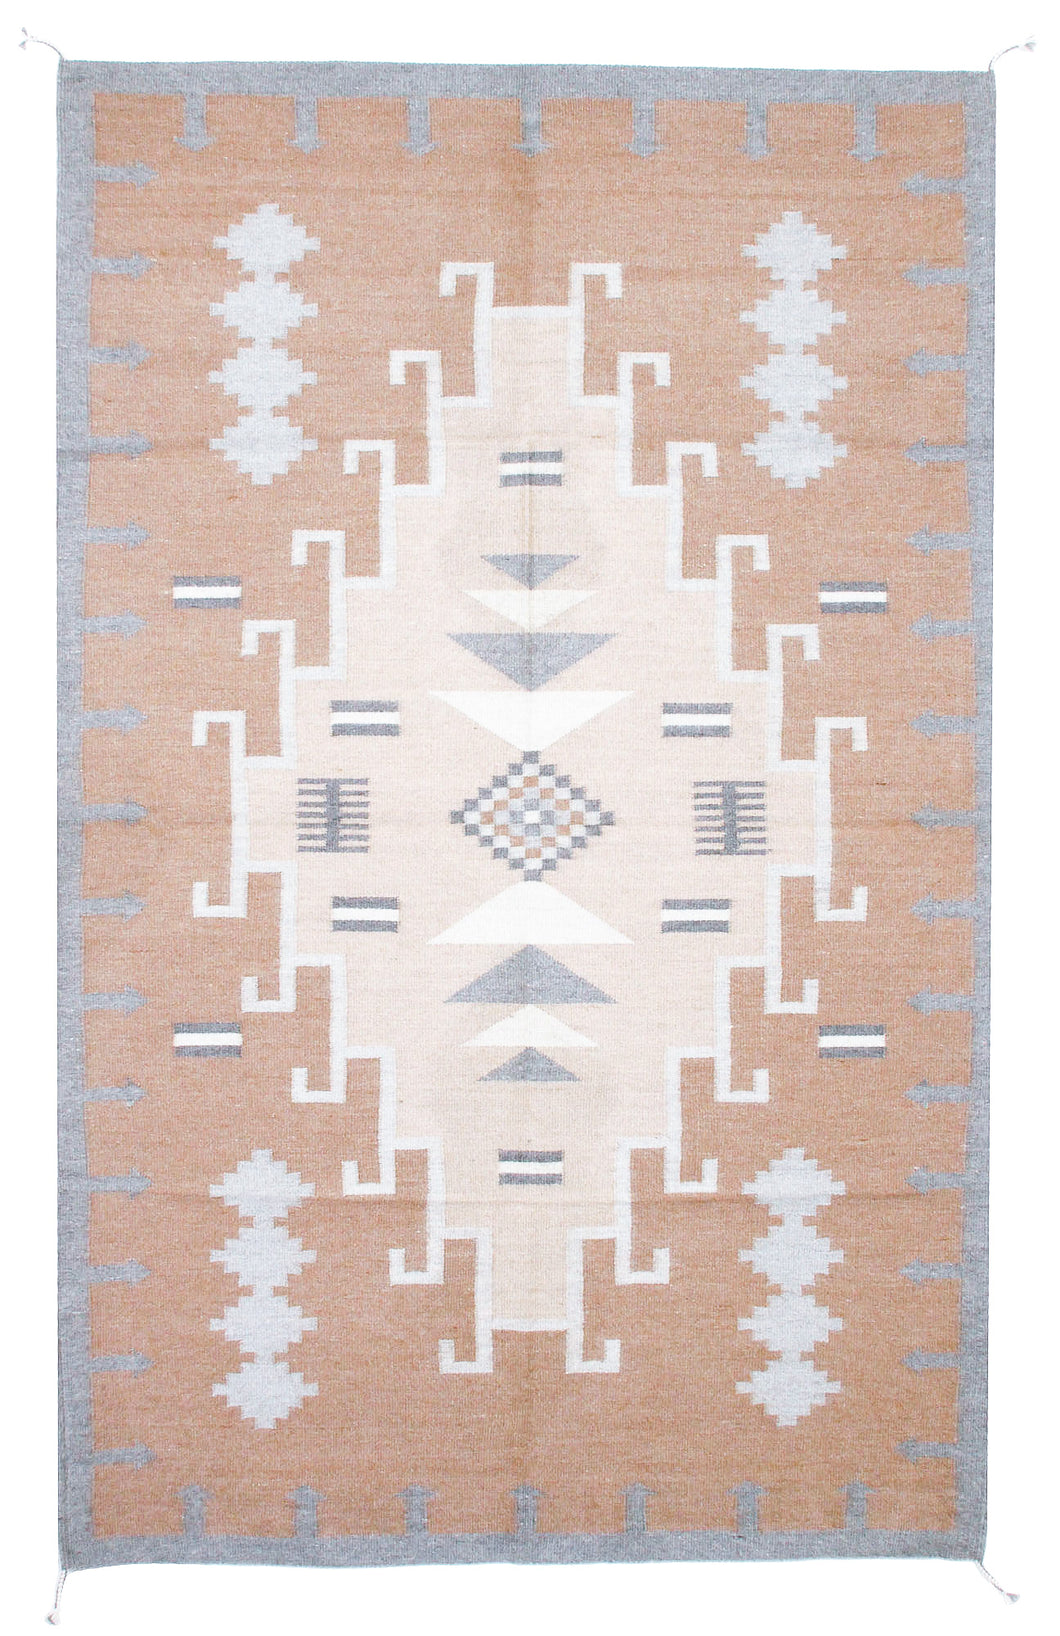 Handwoven Zapotec Indian Rug - 1920s Lincoln Natural